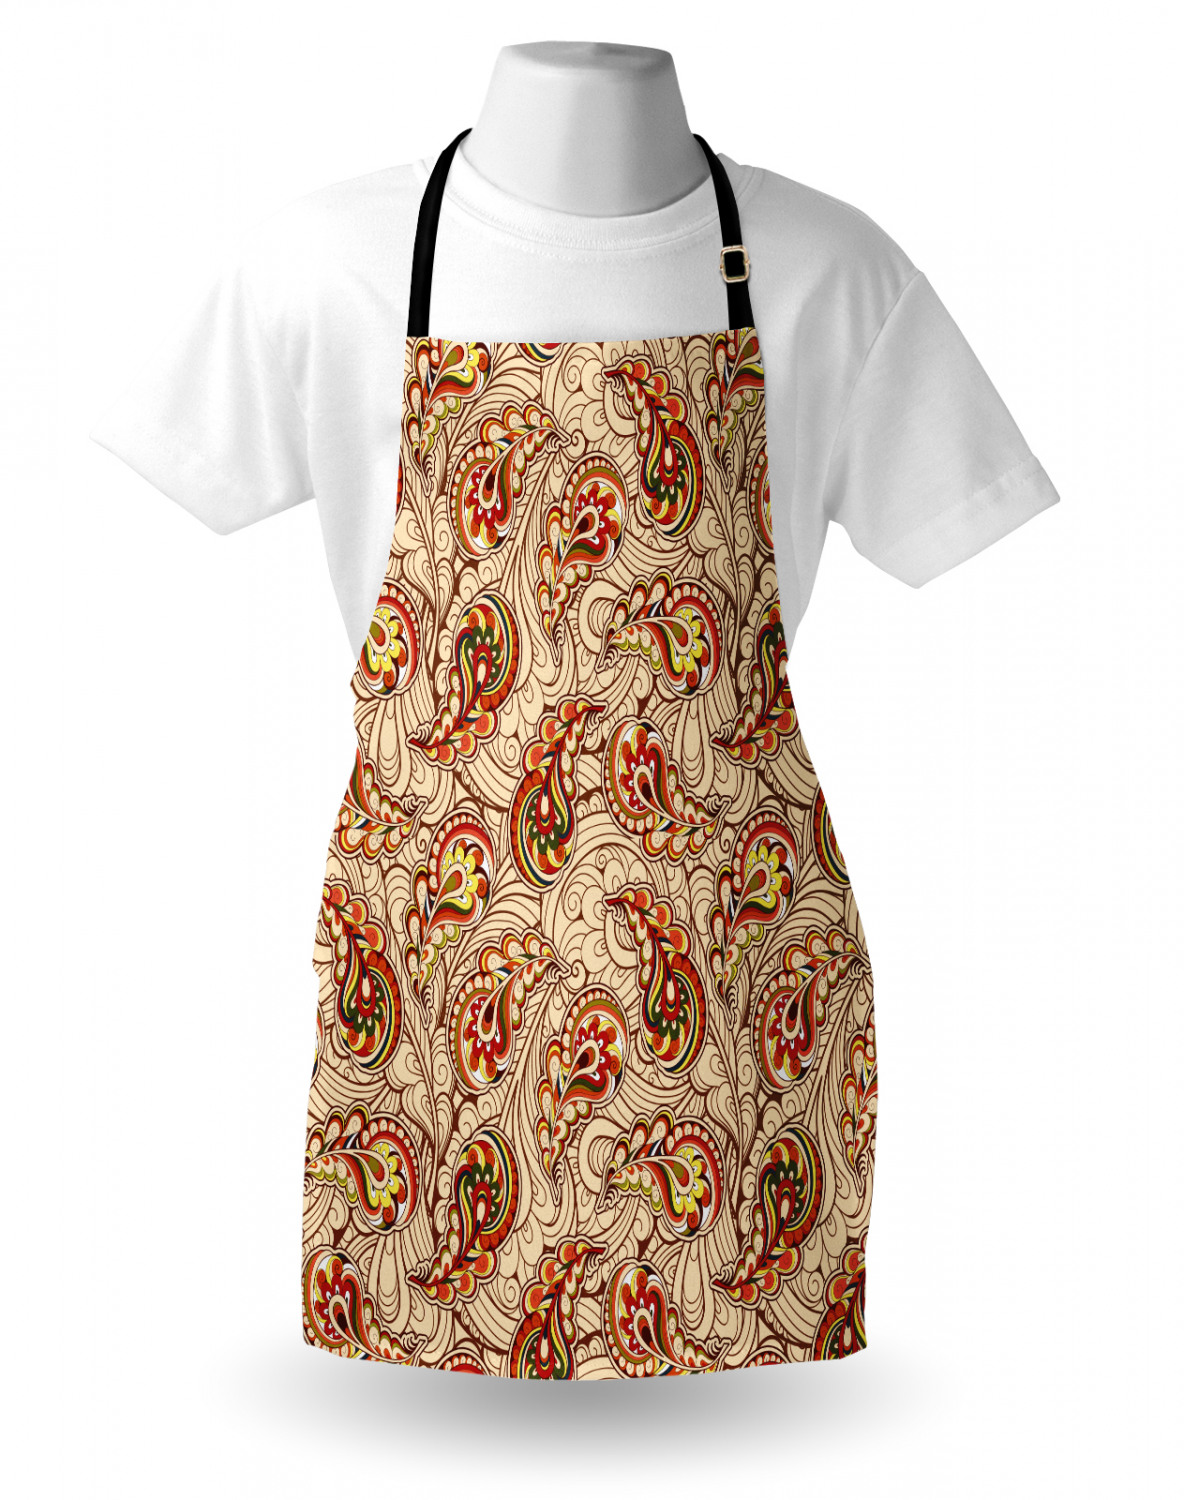 Details about   Ambesonne Apron Bib with Adjustable Neck for Gardening Cooking Durable 